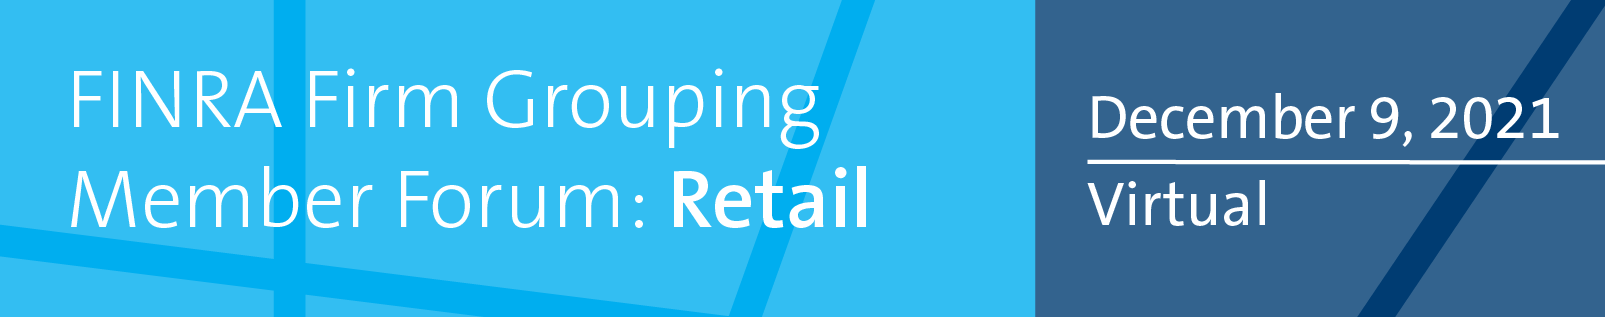 FINRA Firm Grouping Member Forum: Retail